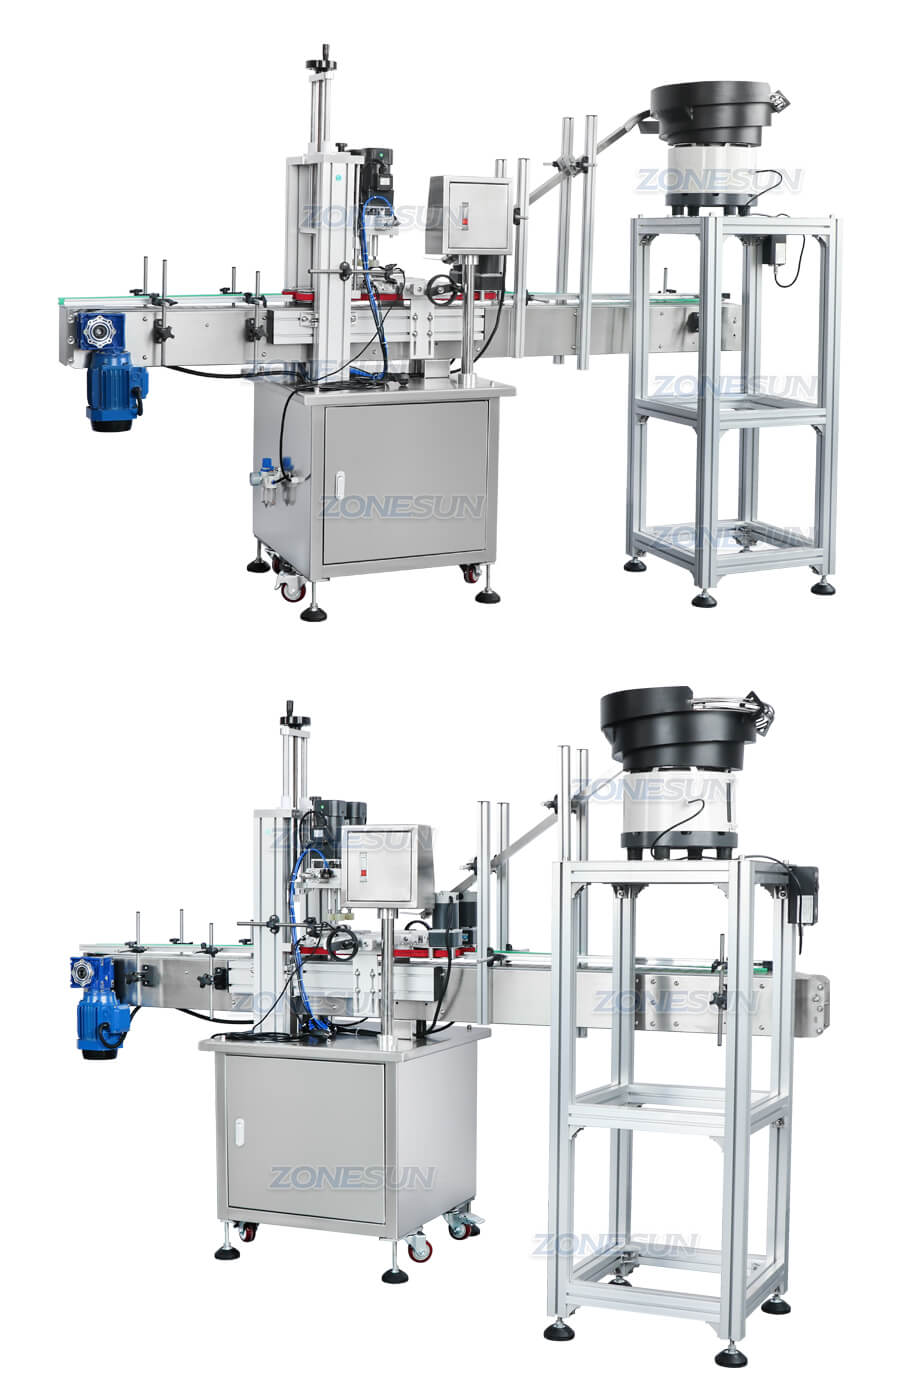 ZS-XG16 Automatic Bottle Capping Machine With Cap Feeder